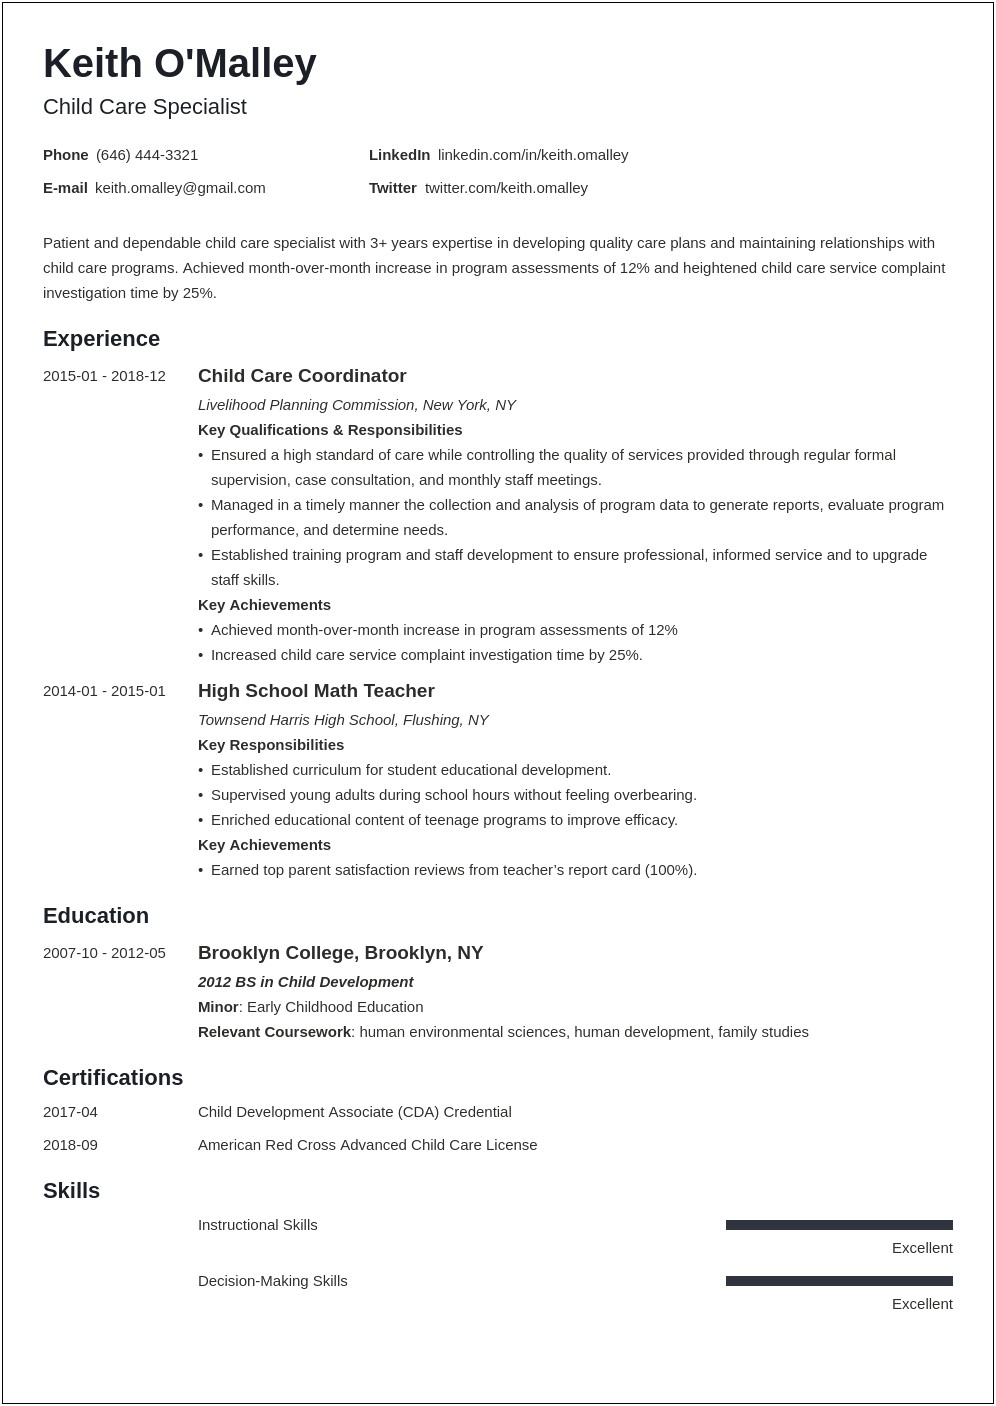 Child Care Assistant Director Resume Sample